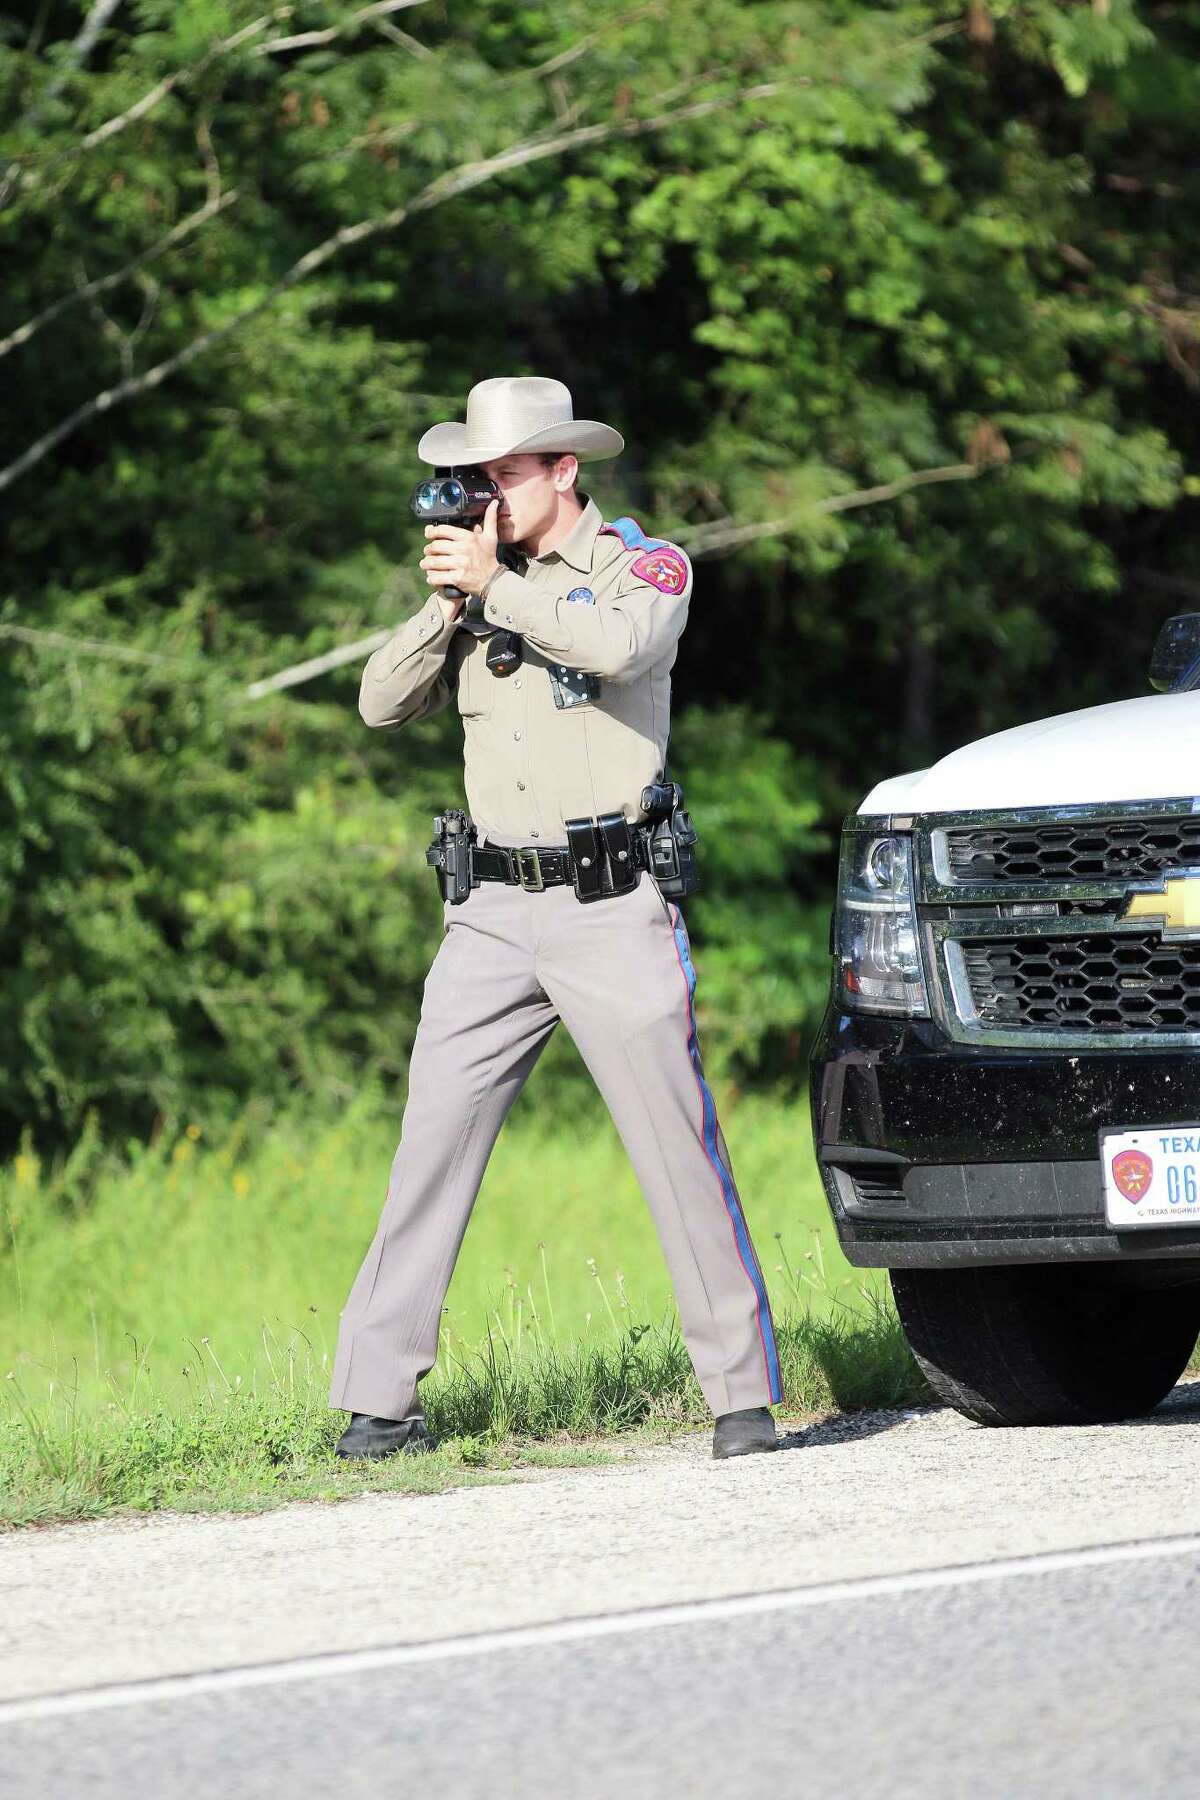 DPS troopers, including Trooper Spencer Shaw, will be out all weekend in stepped up patrols during the Labor Day holiday weekend. Slow down, make sure your seat belt is fastened and don?’t drink and drive.